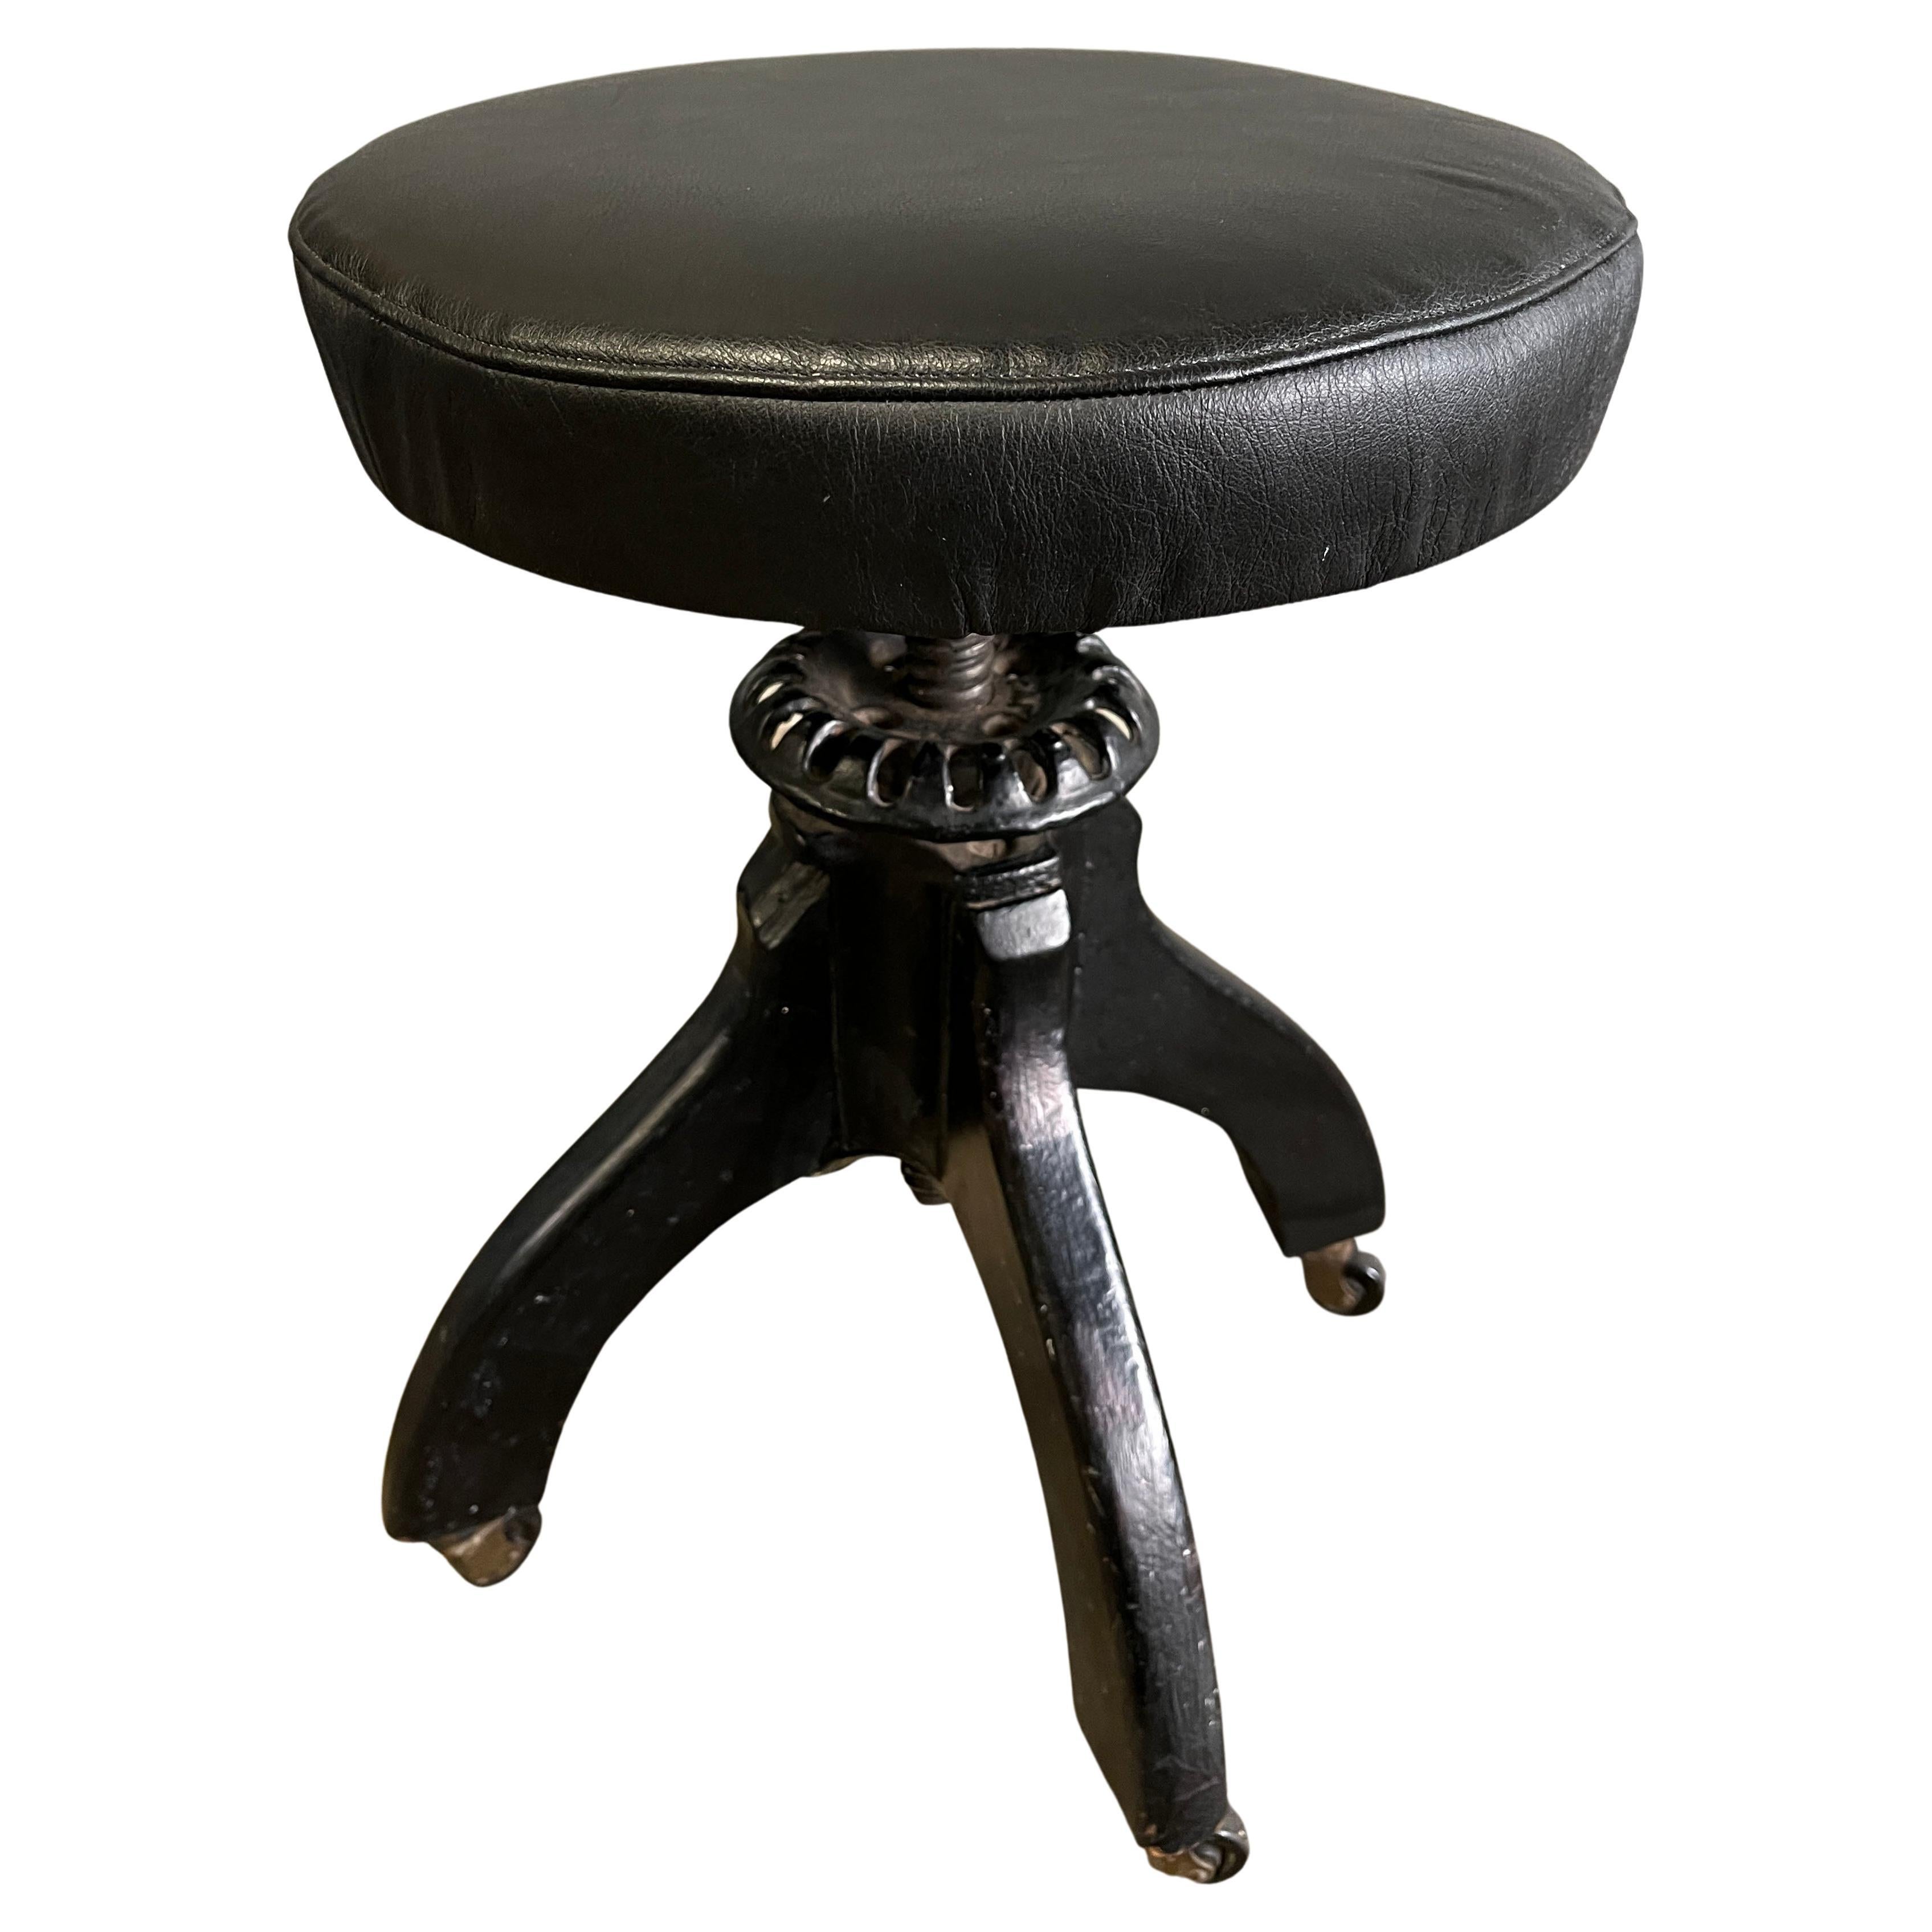 Wonderful hand made three legged stool with adjustable height ( 16.5-23'' )

Painted black wood legs with cast iron elements. The top has a newer leather top. Fits with Midcentury Modern and more antique designs. 

